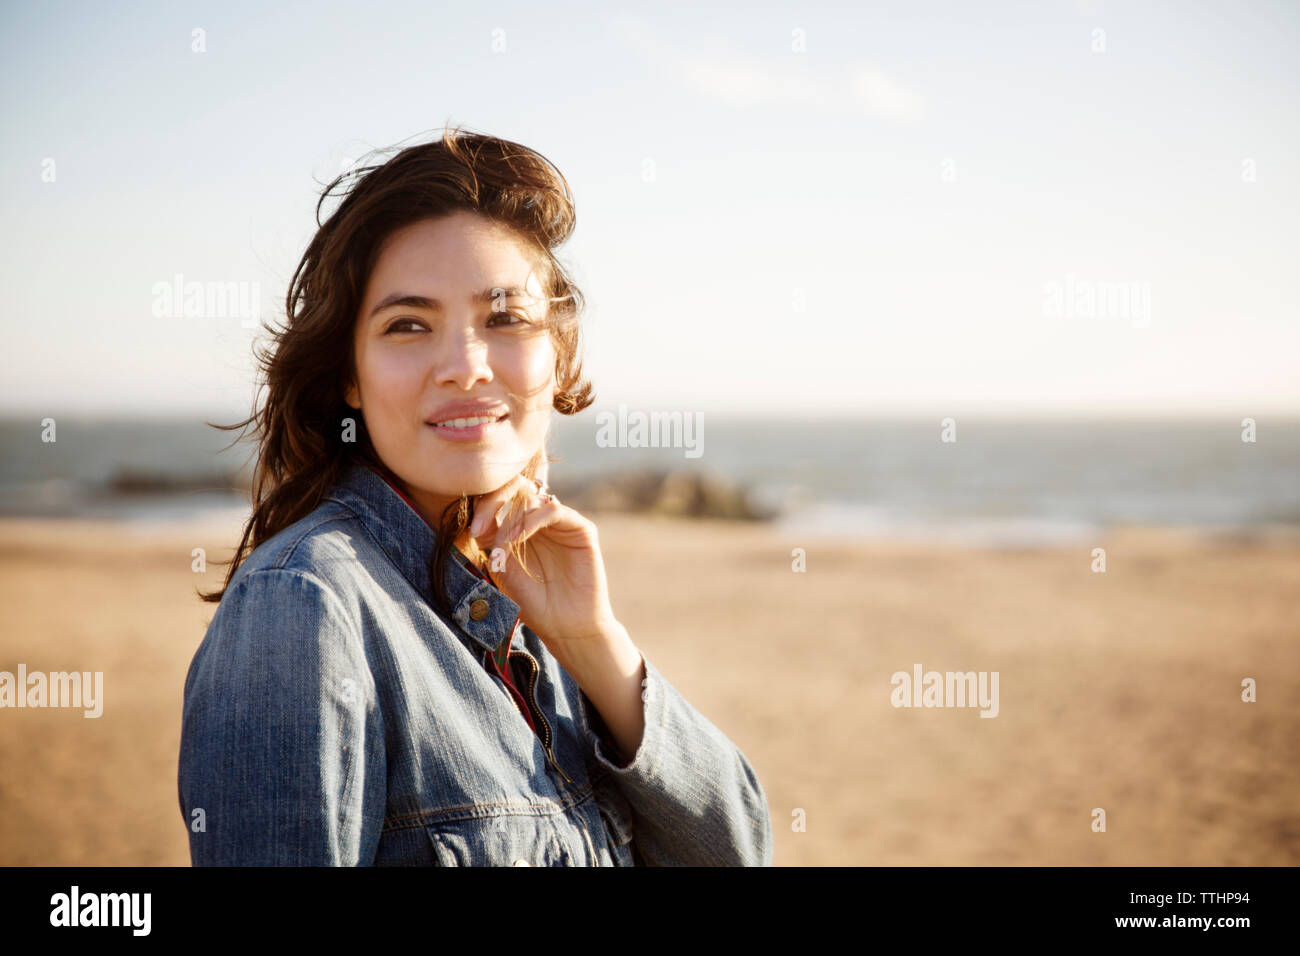 Woman smiling while standing on beach Banque D'Images